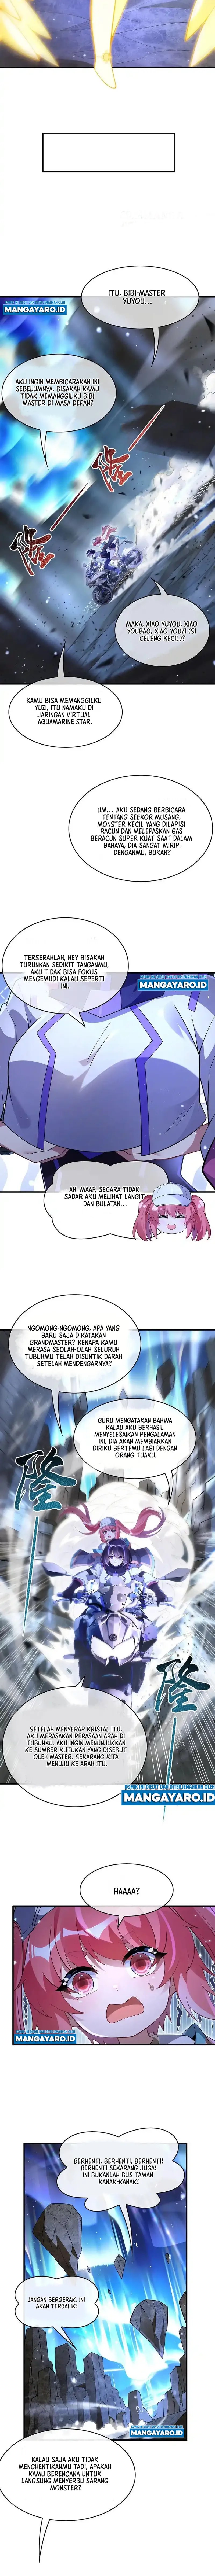 Dilarang COPAS - situs resmi www.mangacanblog.com - Komik my female apprentices are all big shots from the future 272 - chapter 272 273 Indonesia my female apprentices are all big shots from the future 272 - chapter 272 Terbaru 7|Baca Manga Komik Indonesia|Mangacan